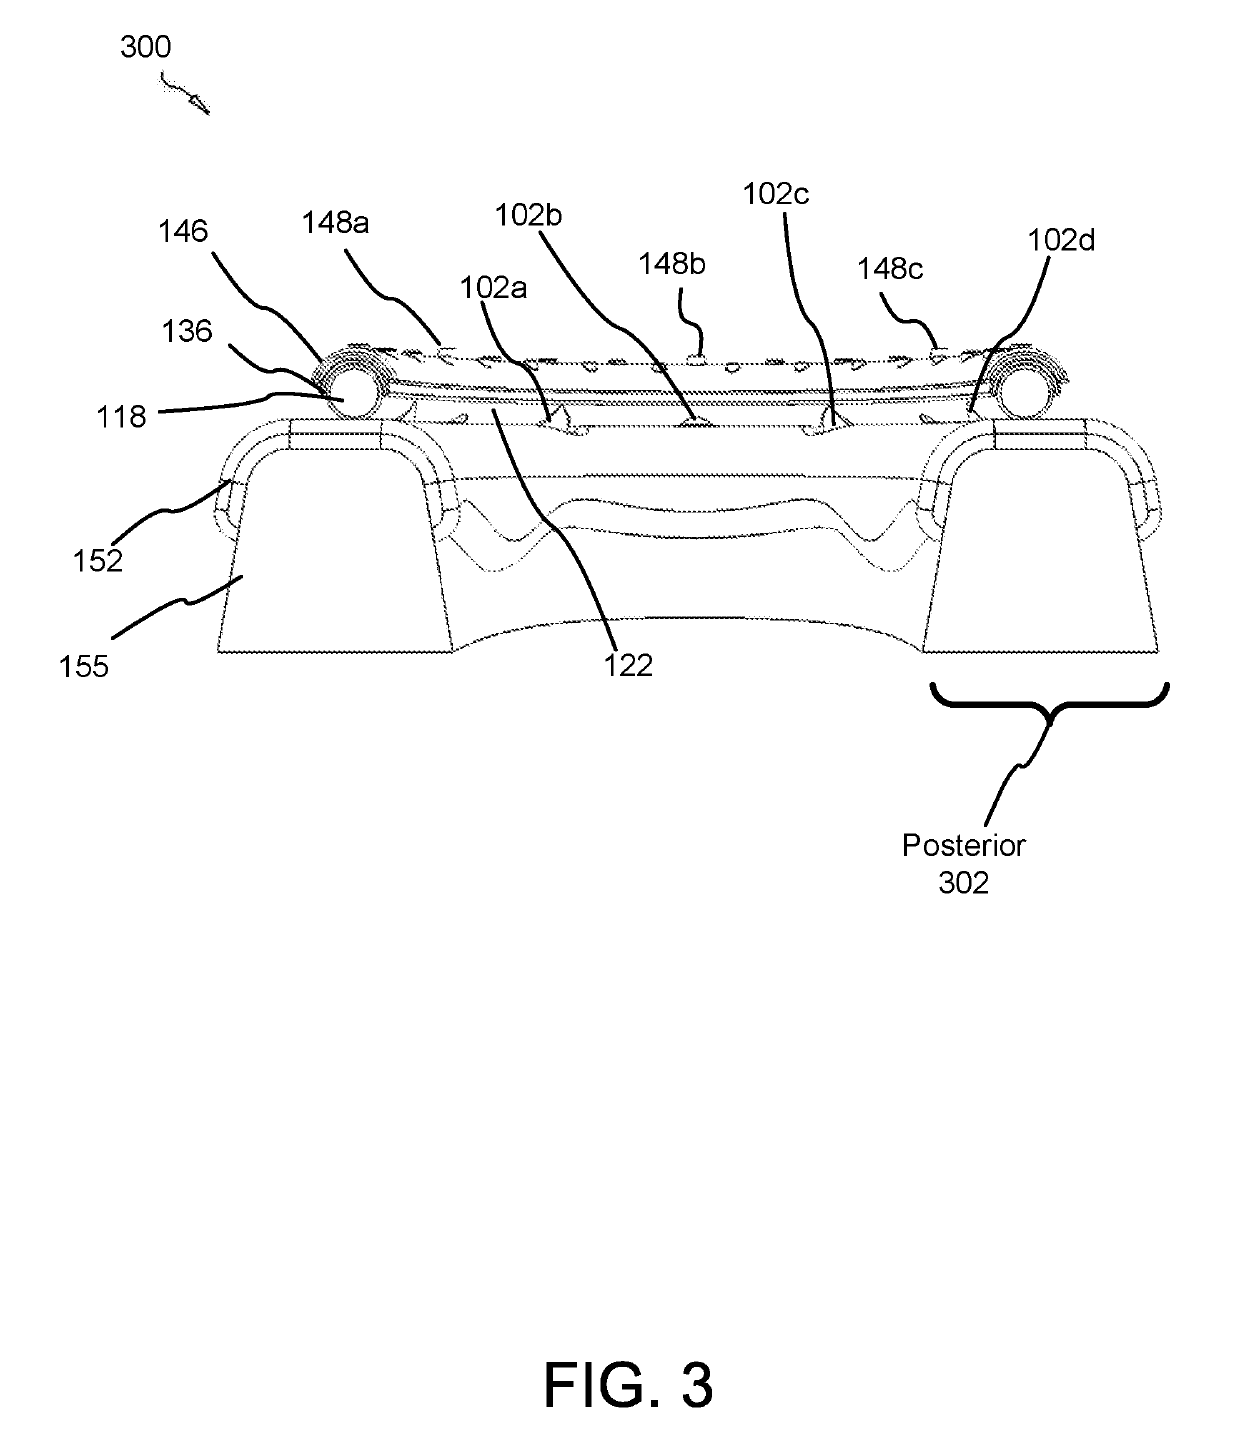 Force damping dental bridge assembly with synthetic periodontal ligament fibers